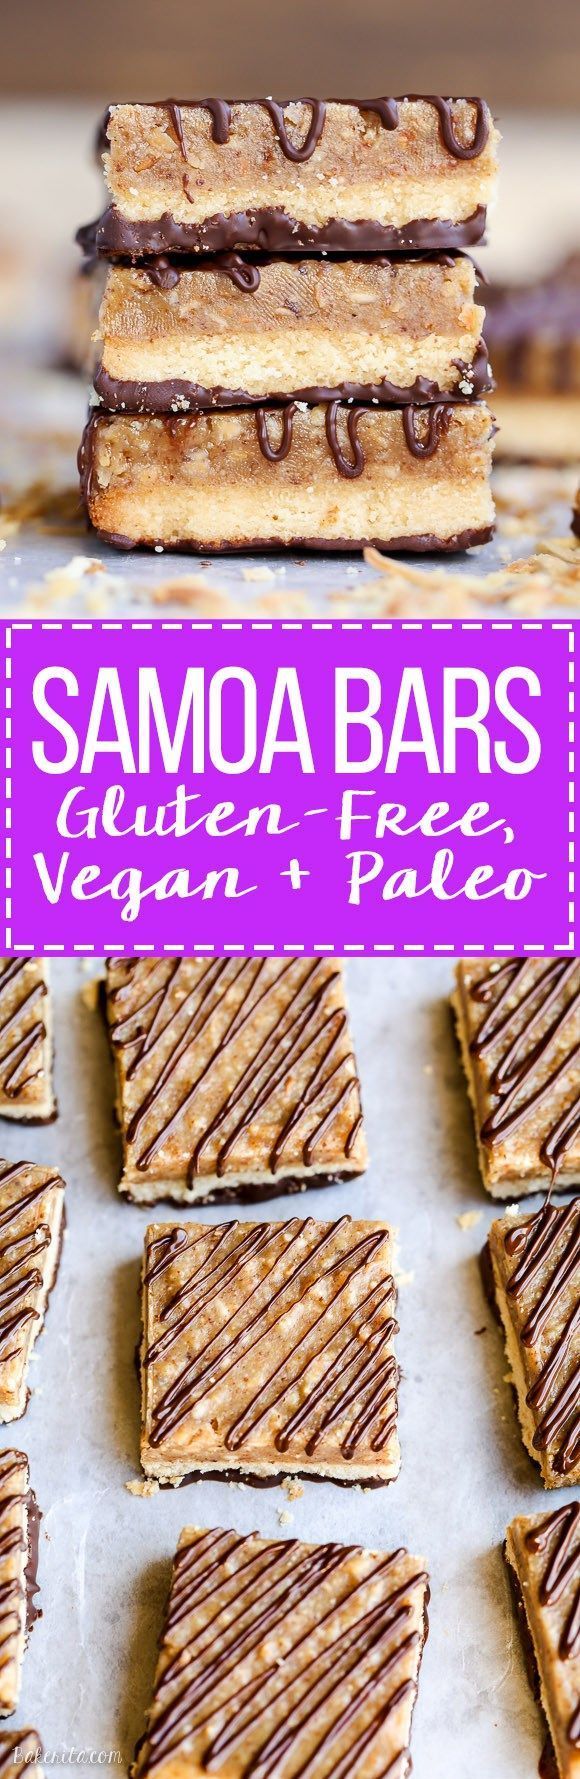 These Samoa Bars have a shortbread crust, a layer of toasted coconut caramel, and a dark chocolate dri